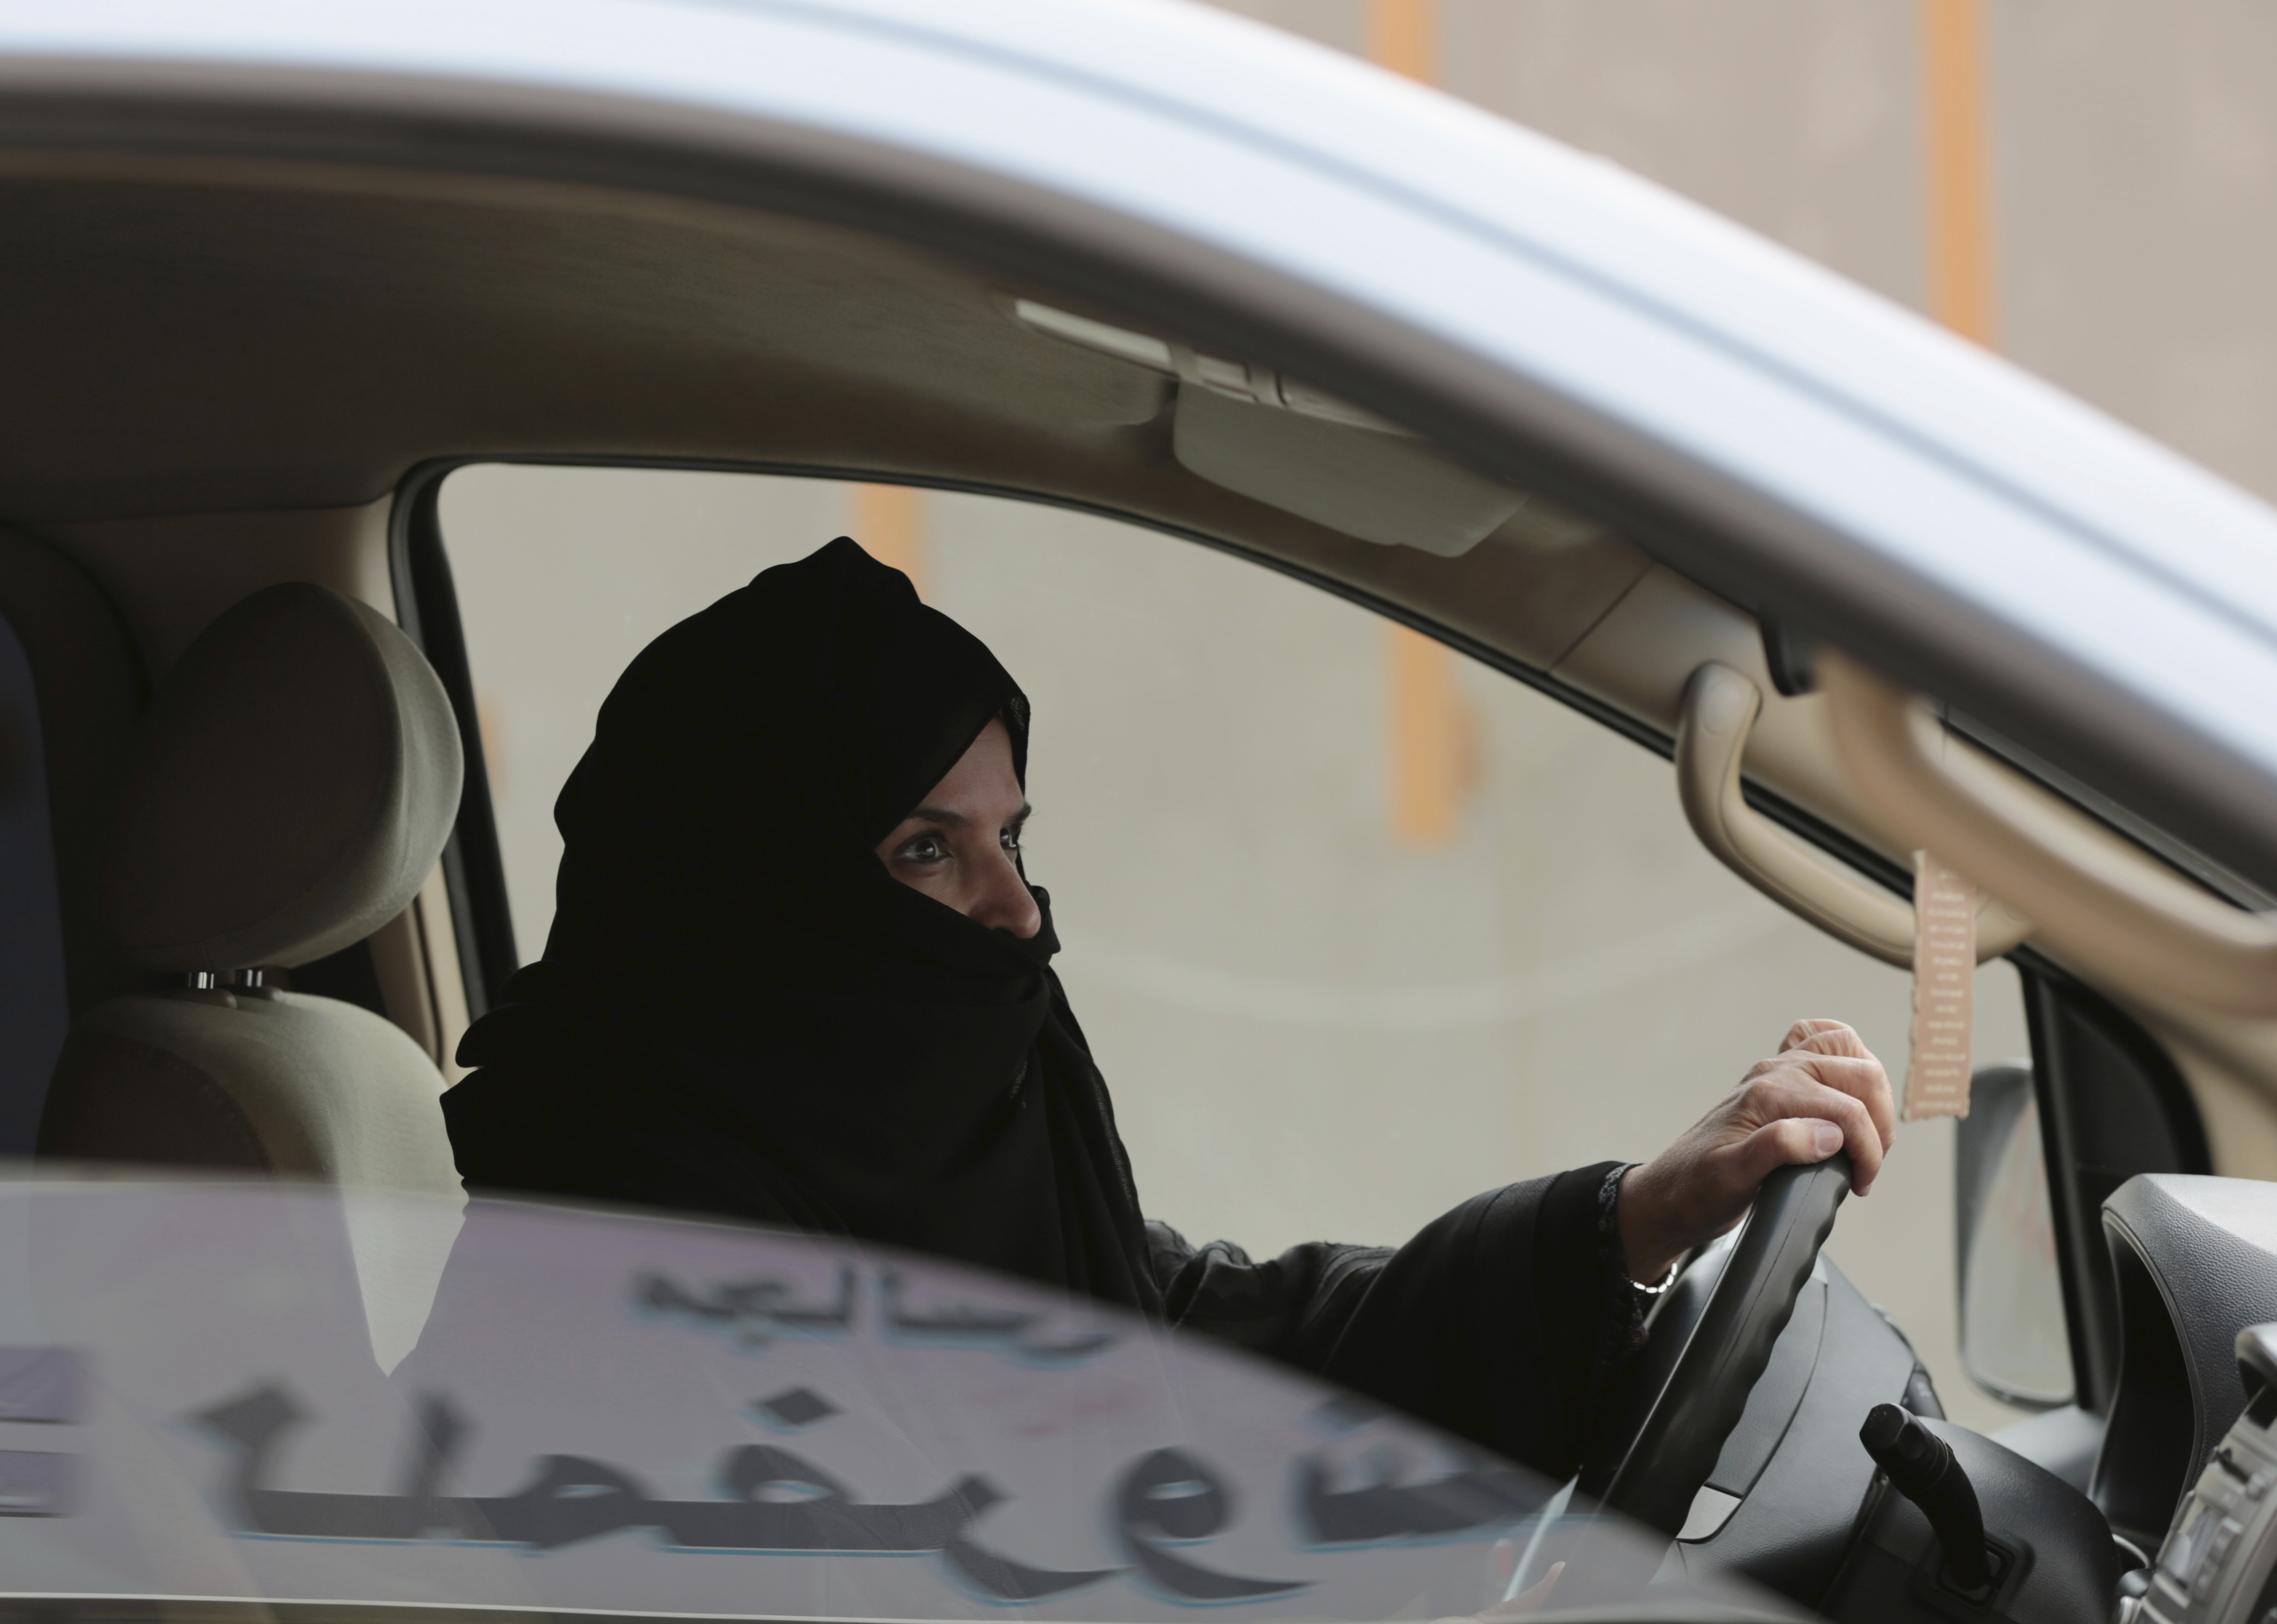 Aziza al-Yousef drives a car in Riyadh as part of a campaign to defy Saudi Arabia's ban on women driving